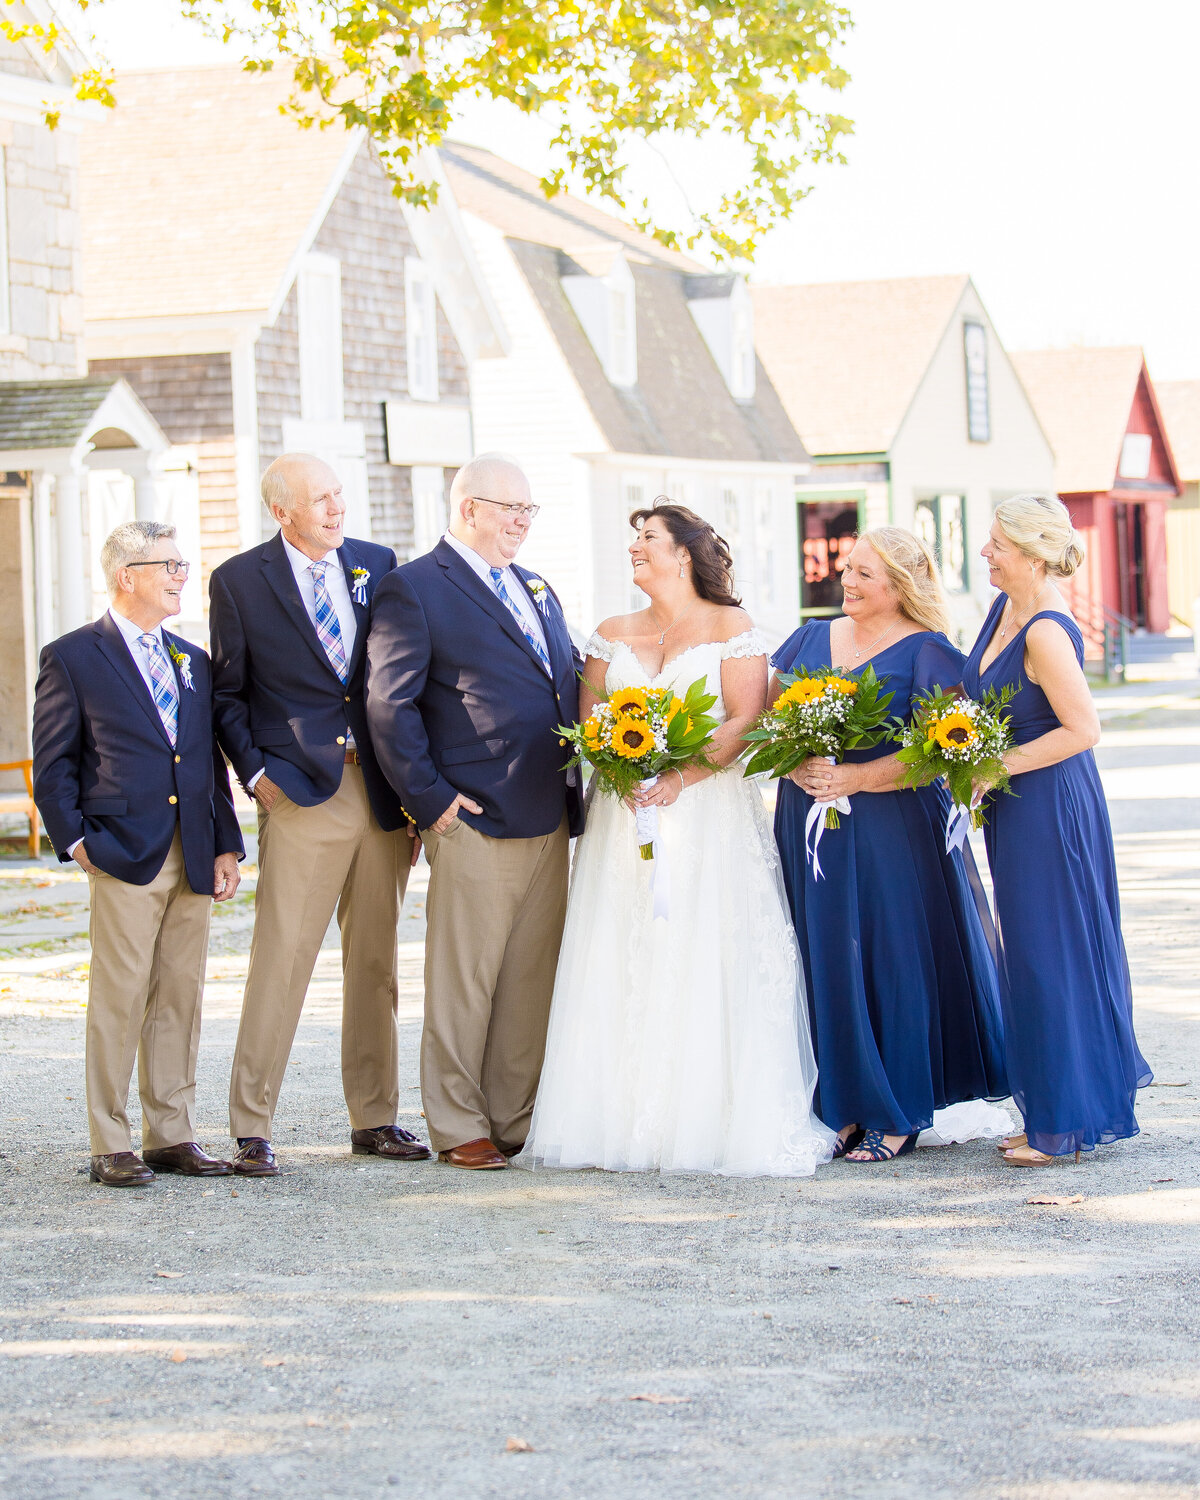 Bride and groom laugh with their groomsmen and bridesmaids at the Mystic Seaport.